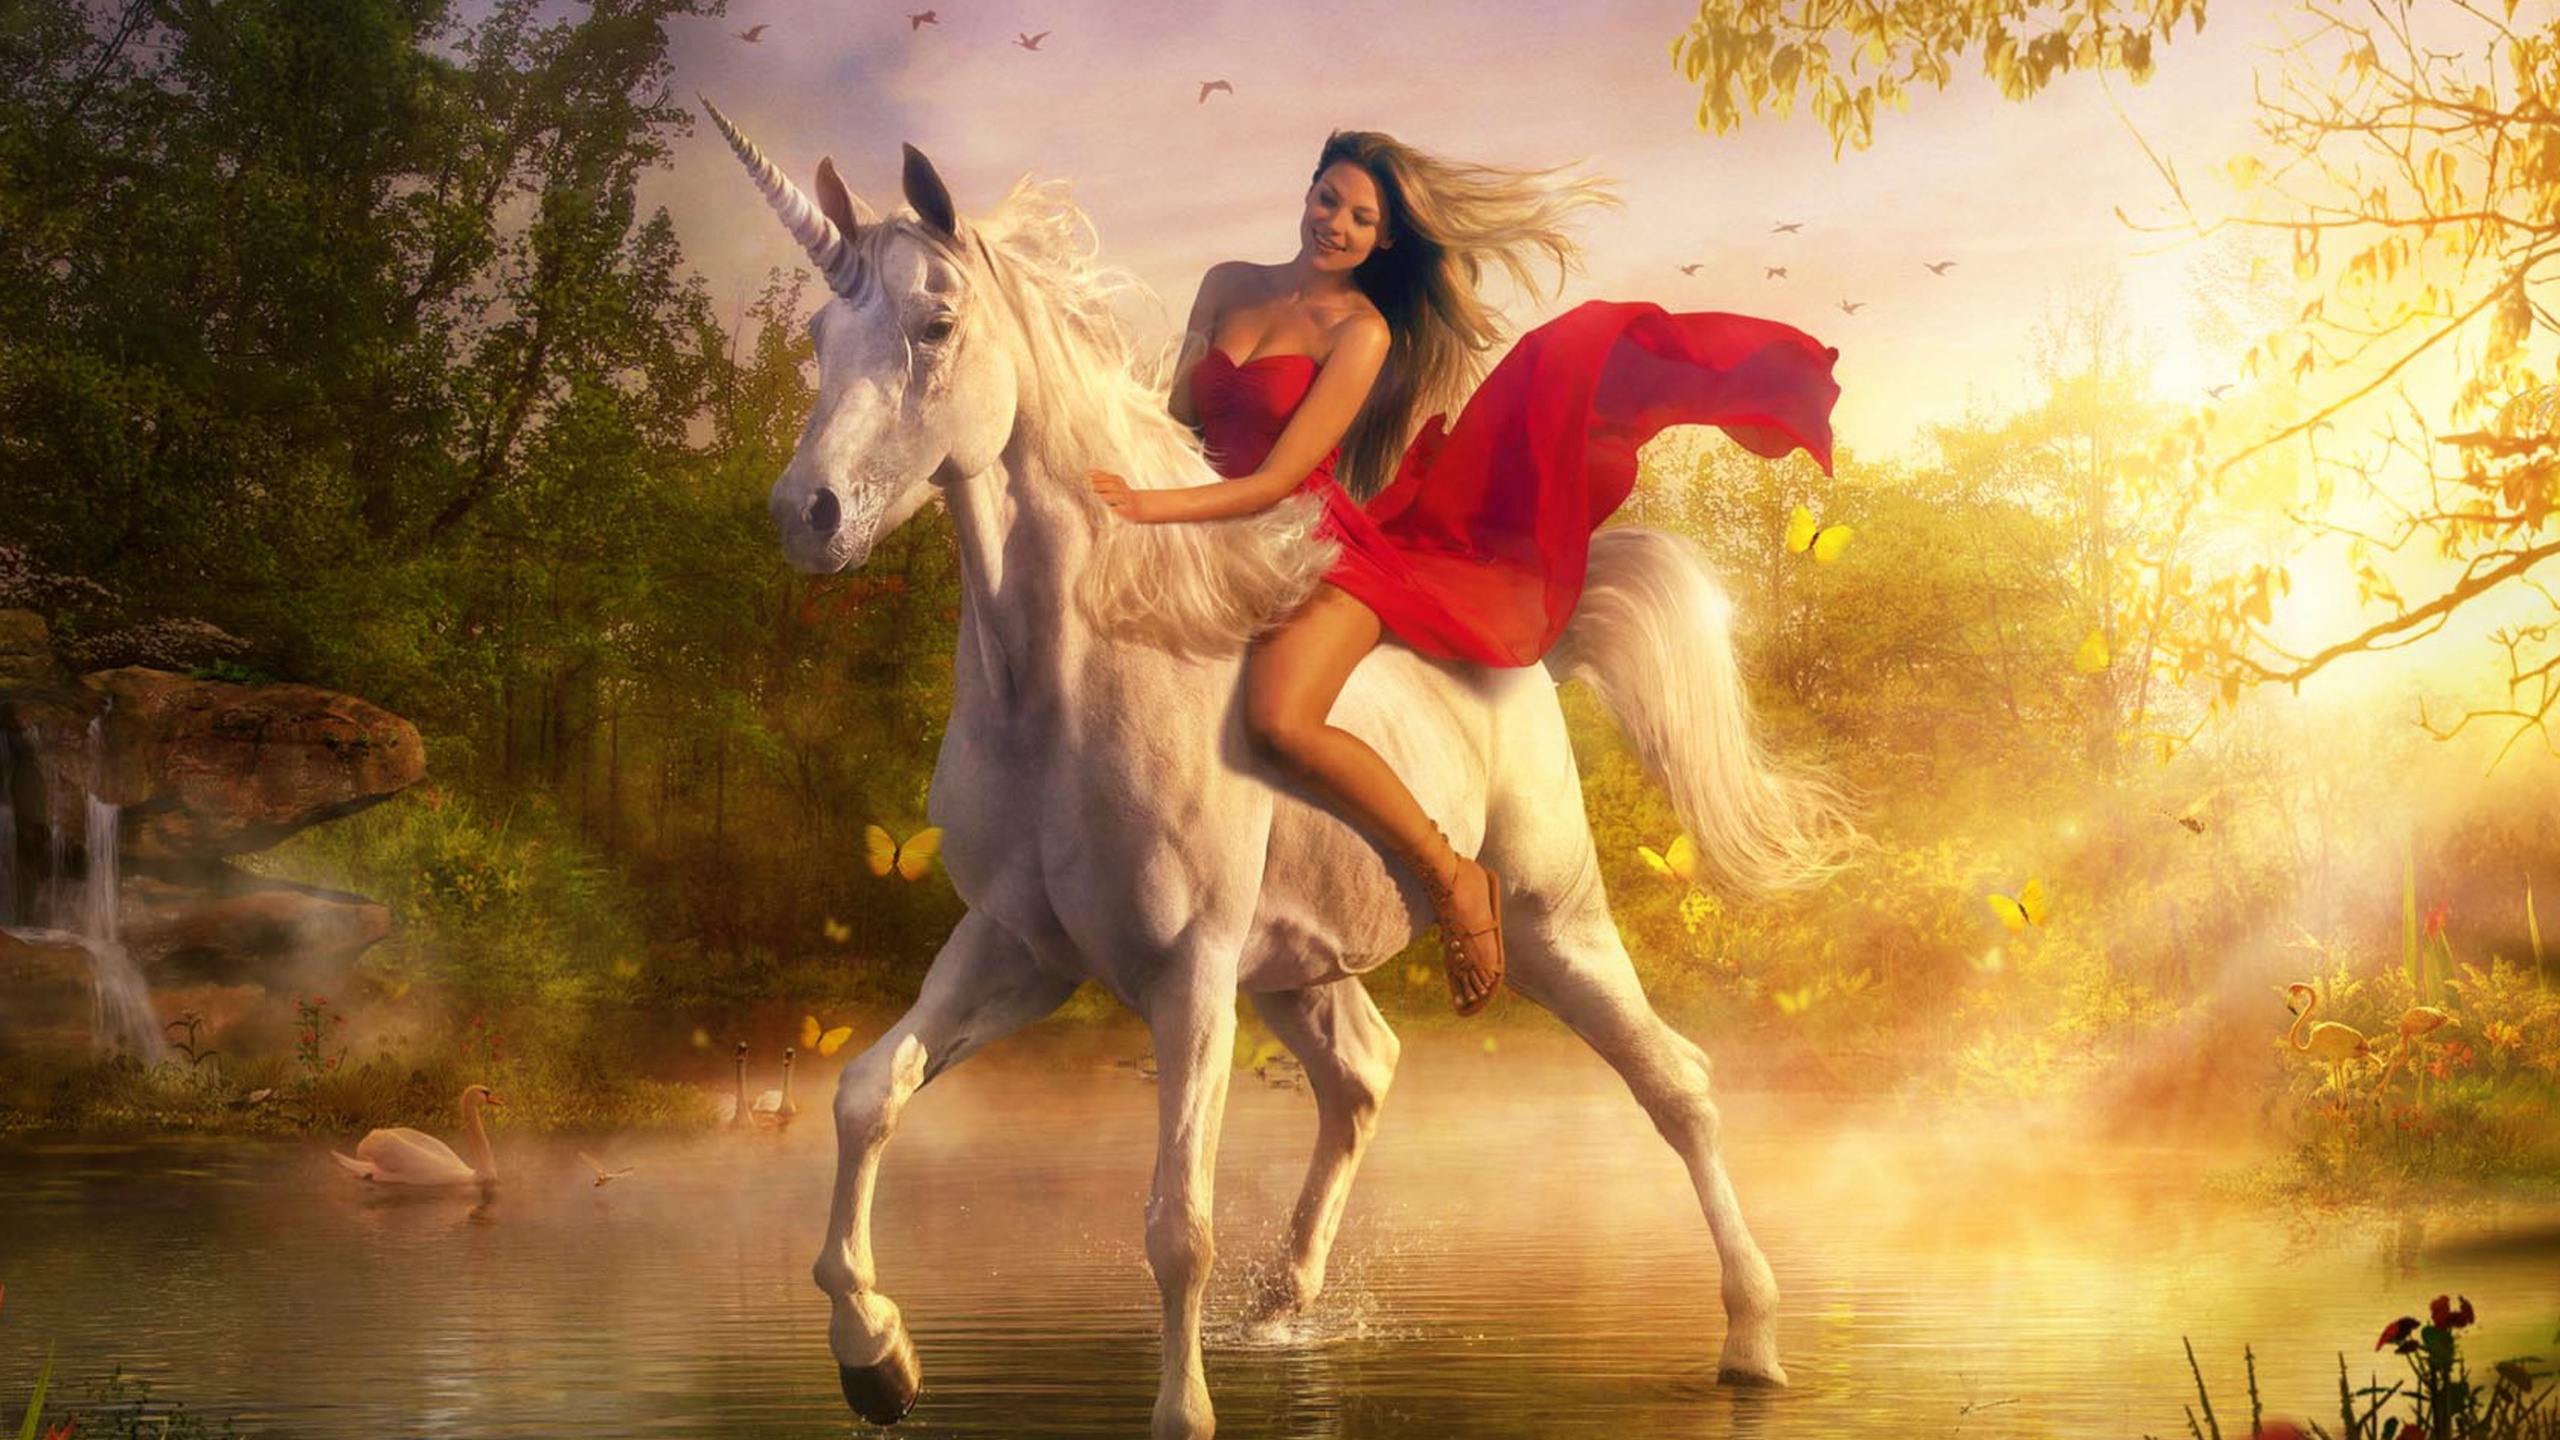 Woman in Red Dress Riding White Horse on Water. Wallpaper in 2560x1440 Resolution